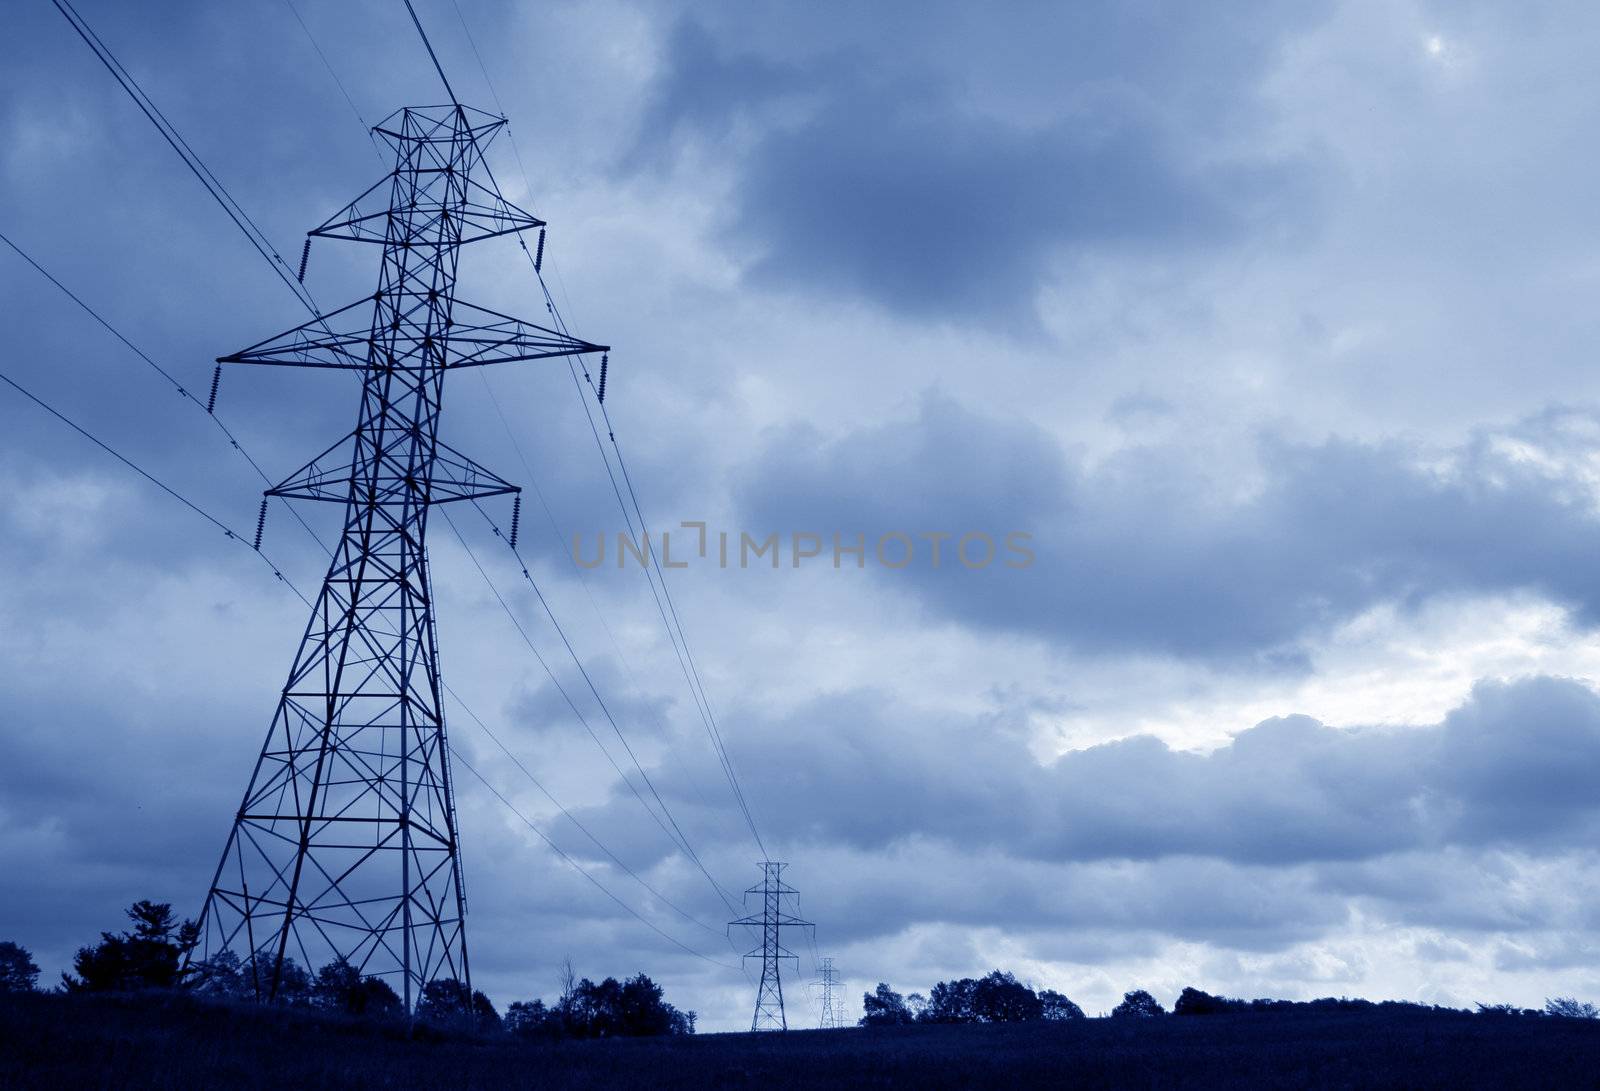 The silhouette of a power lines and towers against blue sky.
